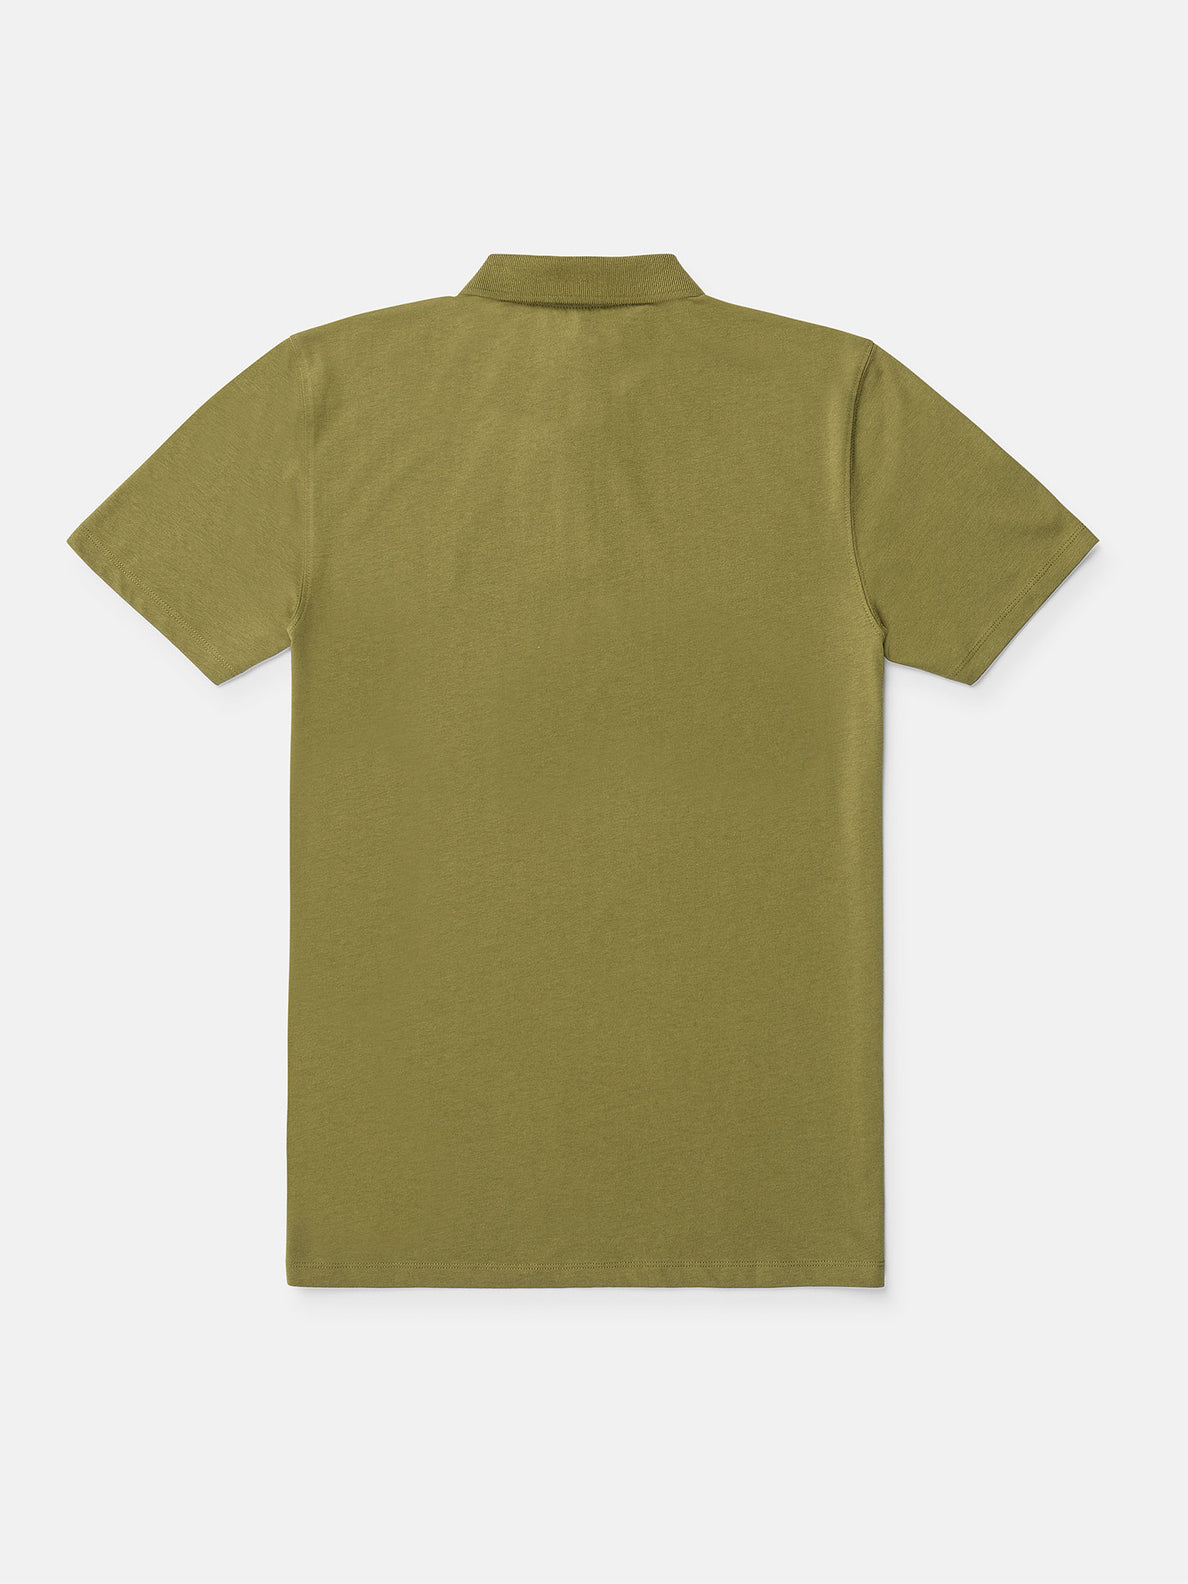 Middler Polo Short Sleeve Shirt - Old Mill